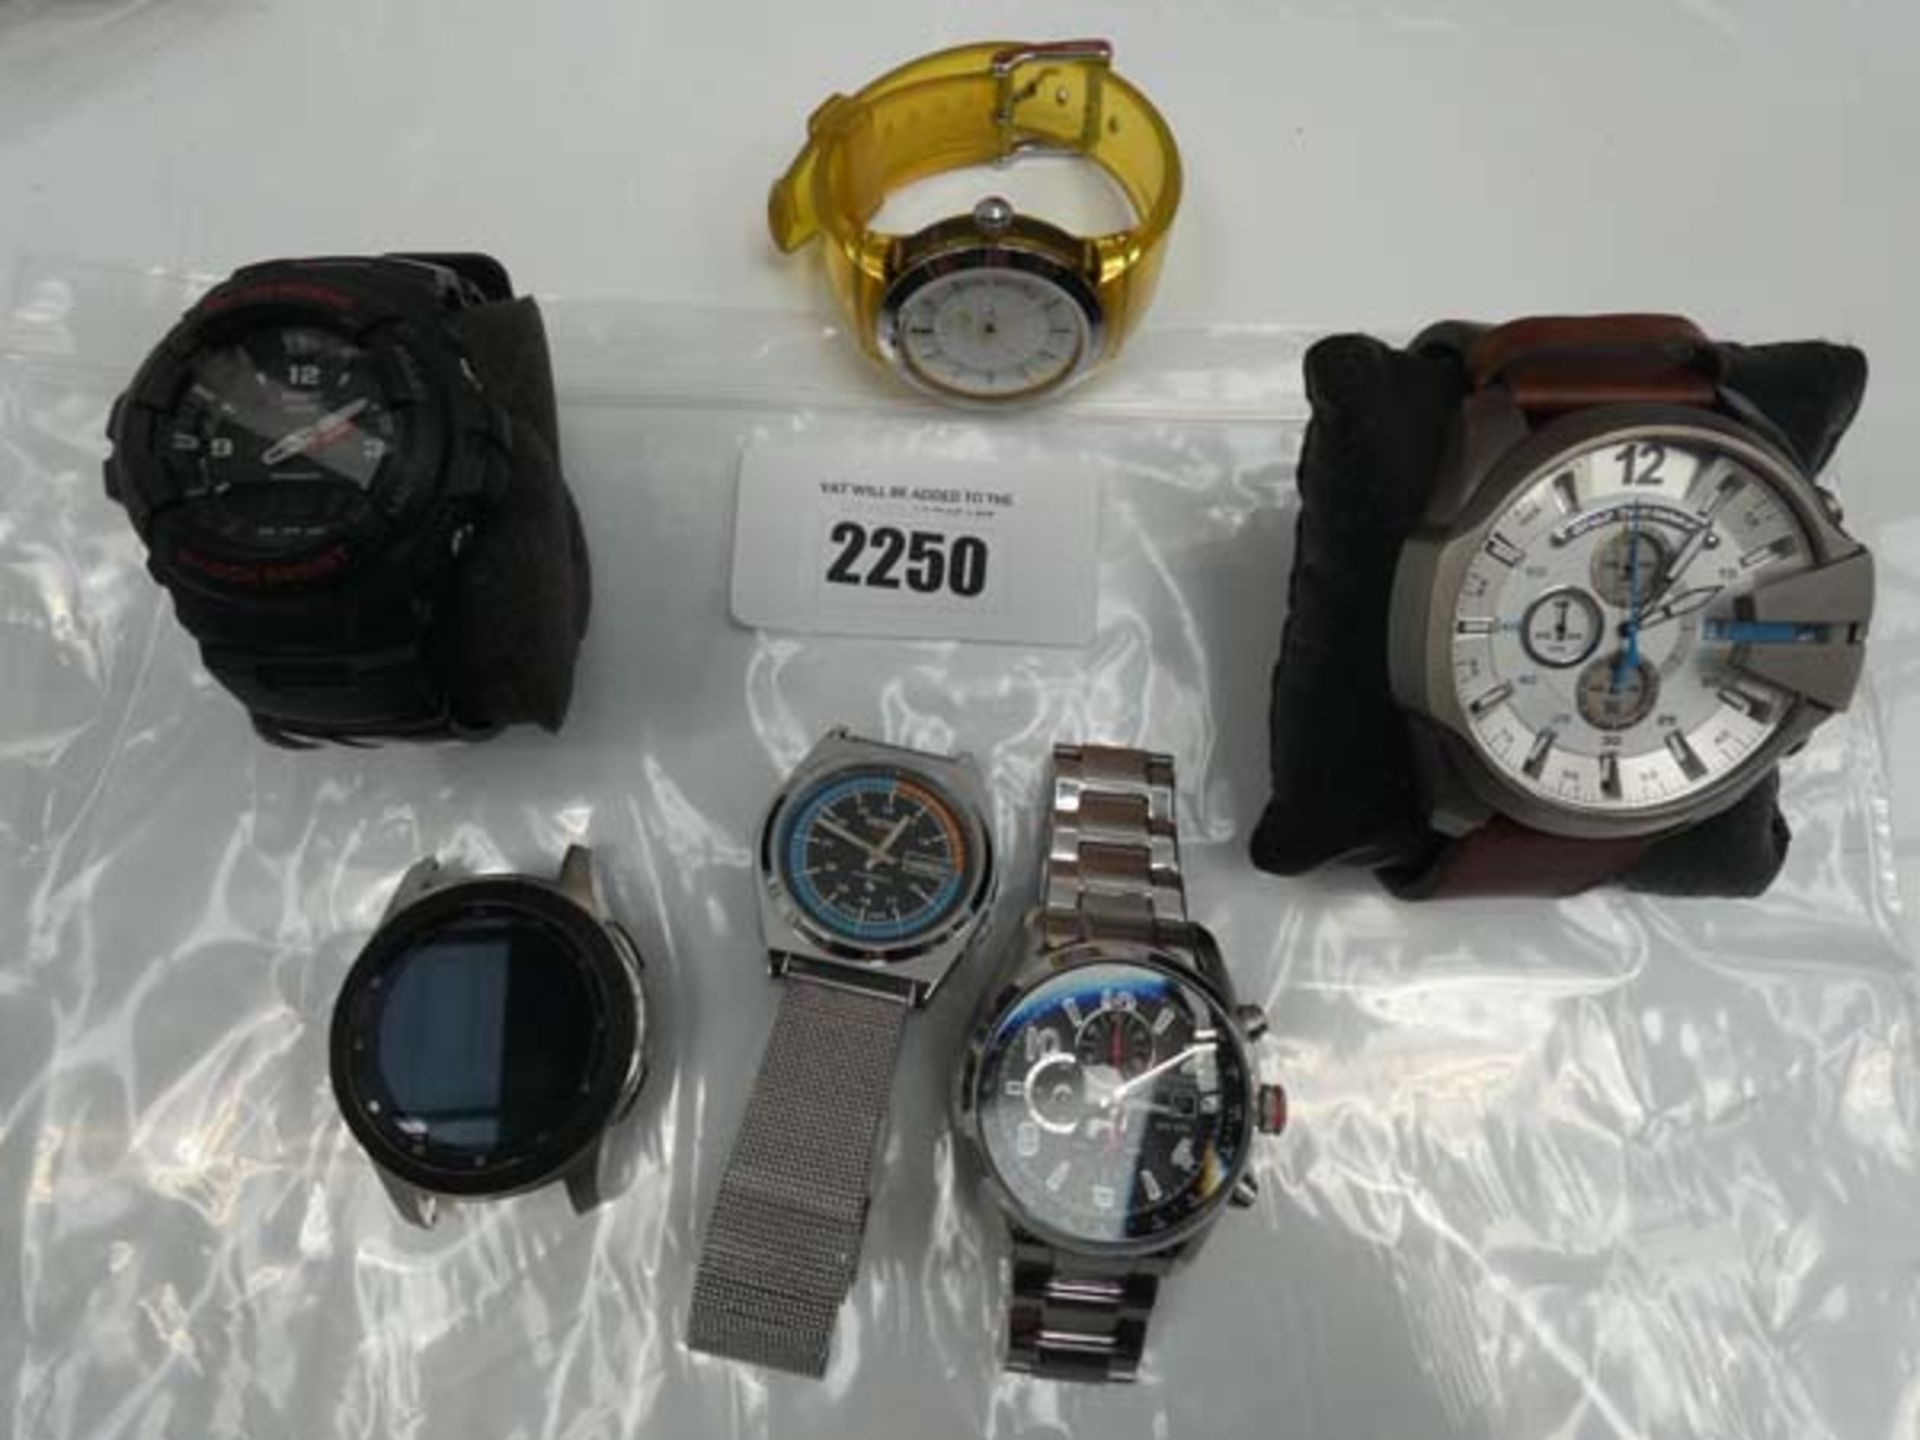 Consignment of loose designer watches; Citizen Eco-Drive, G-Shock, Diesel, DKNY, Seiko and